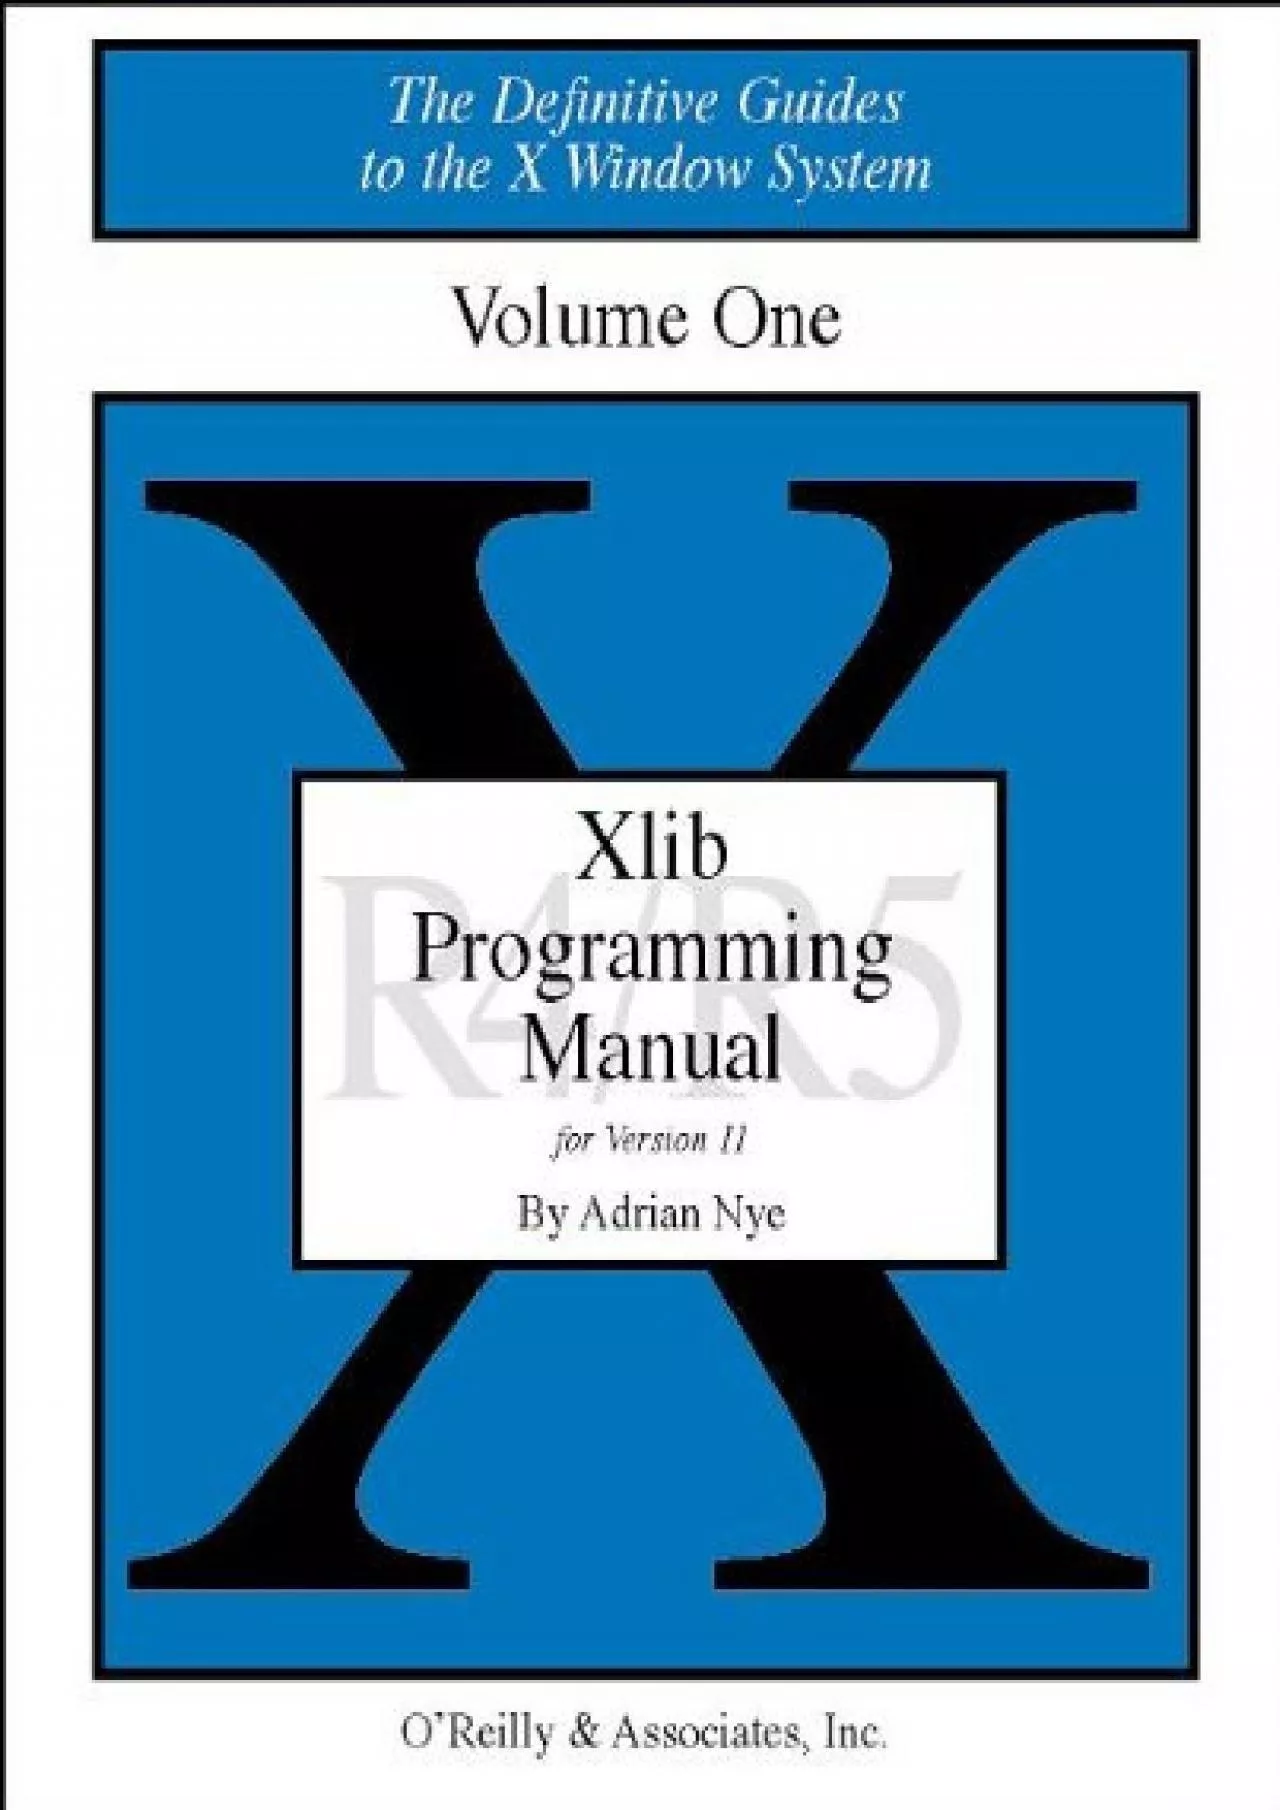 [PDF]-Xlib Programming Manual for Version 11, Rel. 5, Vol. 1 (Definitive Guides to the